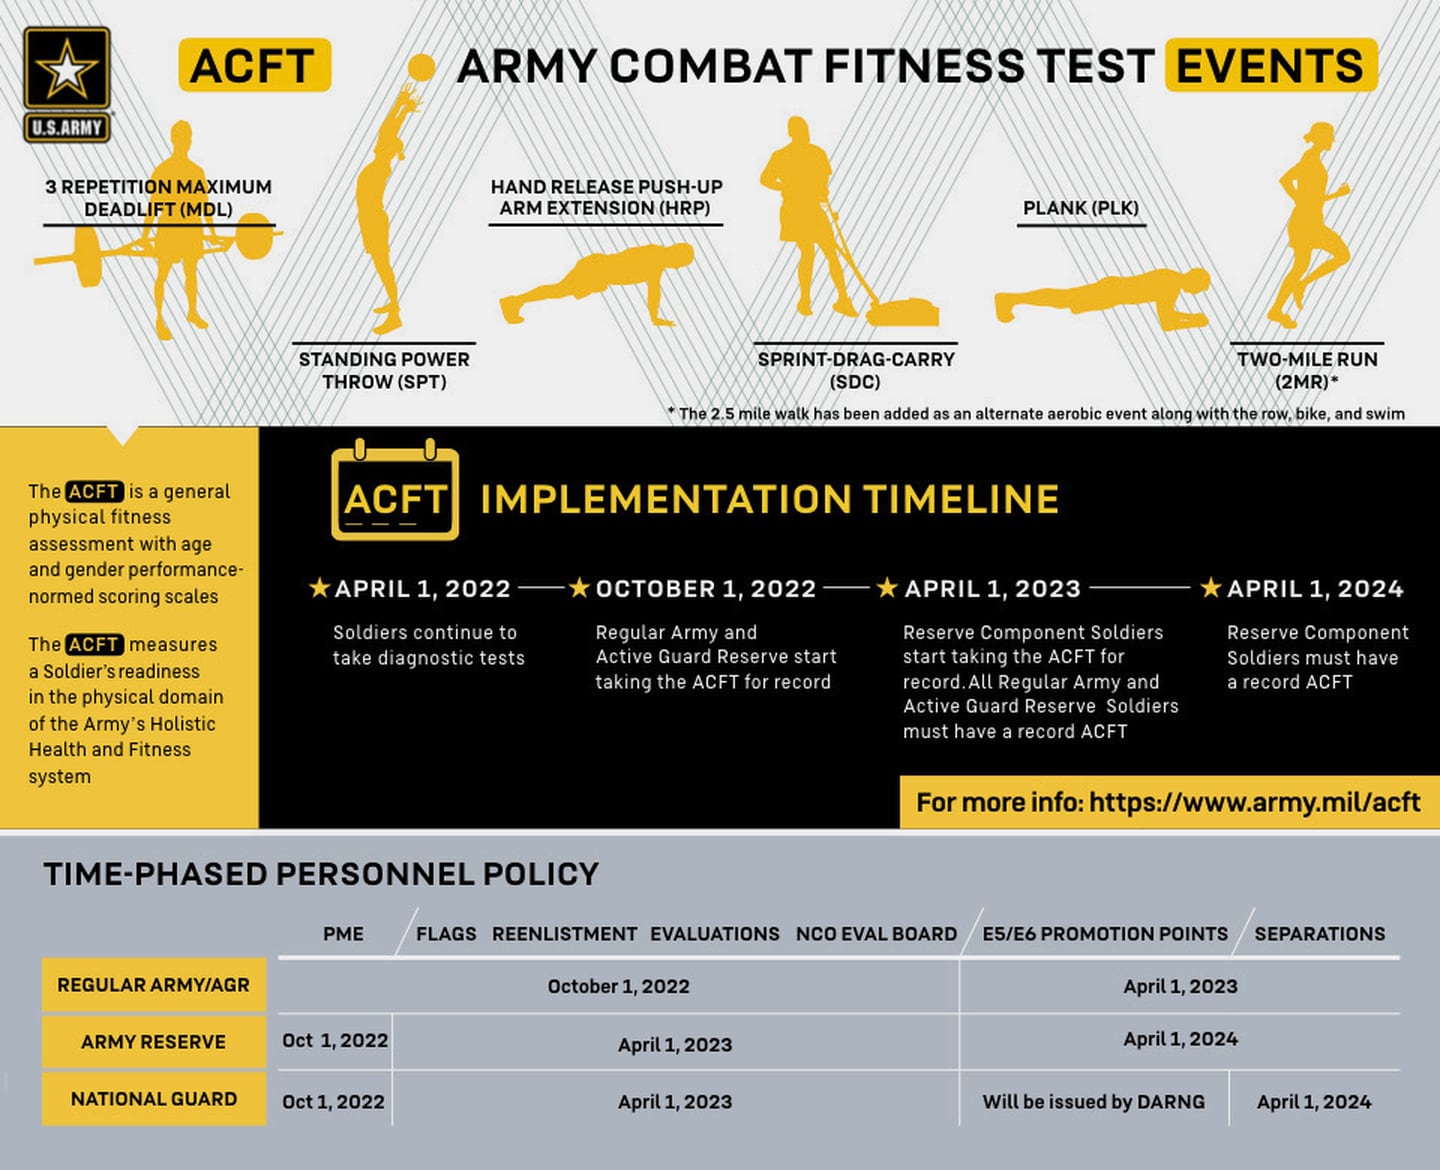 Army Combat Fitness Test debuts with major changes to scoring April 1